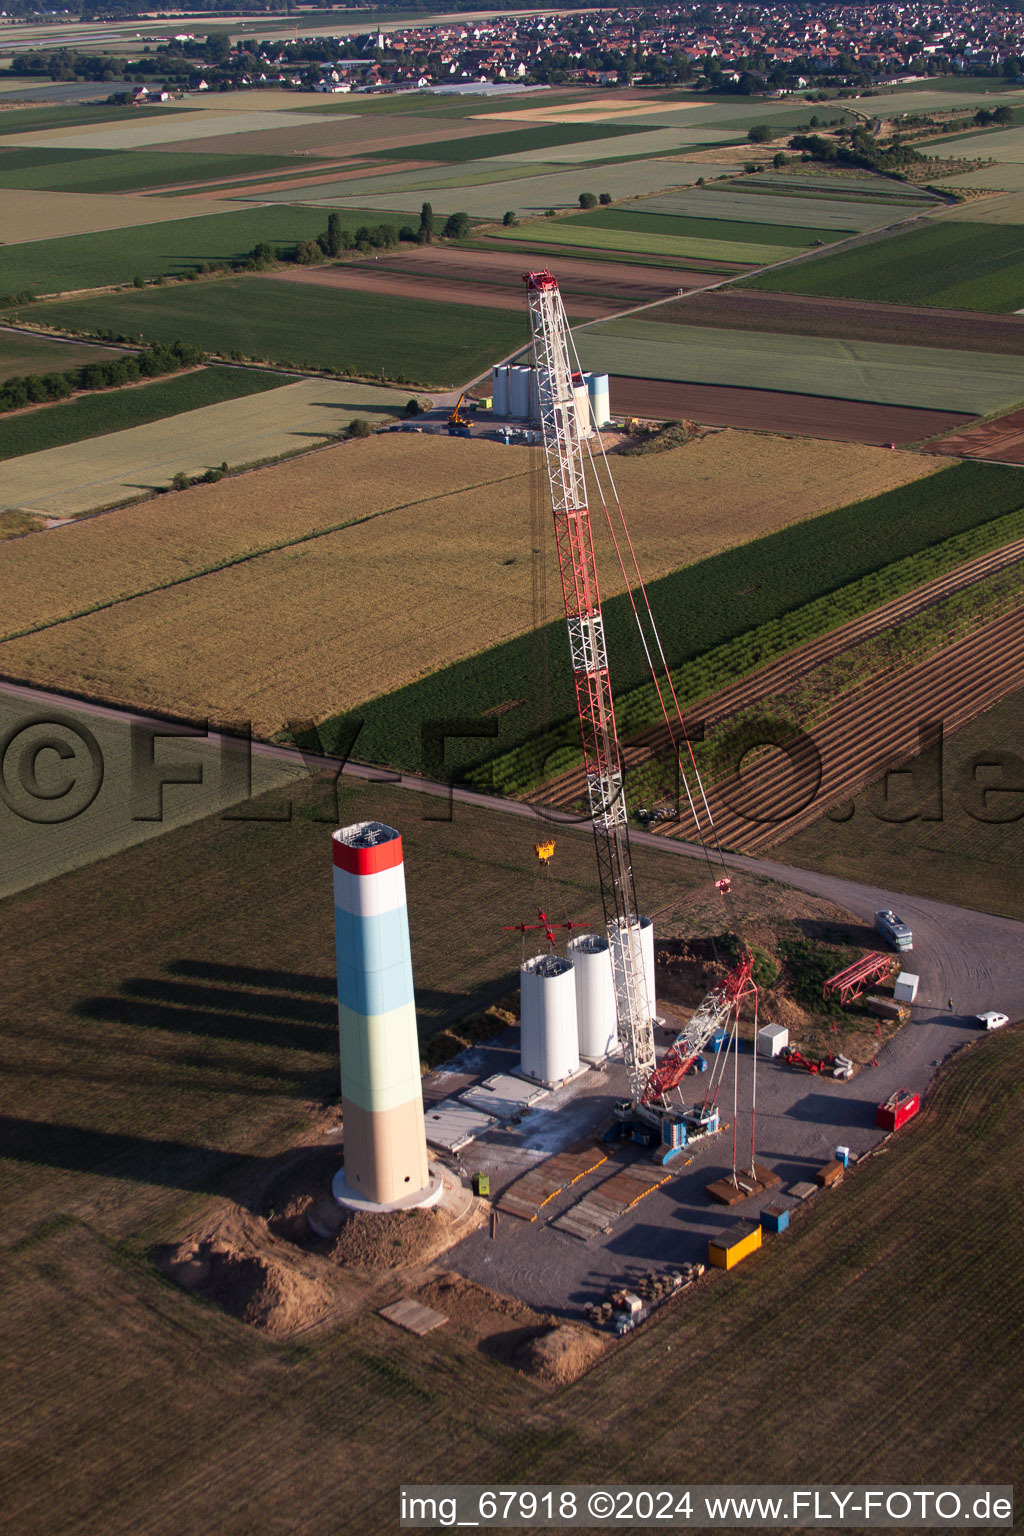 Drone image of New wind farm in Offenbach an der Queich in the state Rhineland-Palatinate, Germany